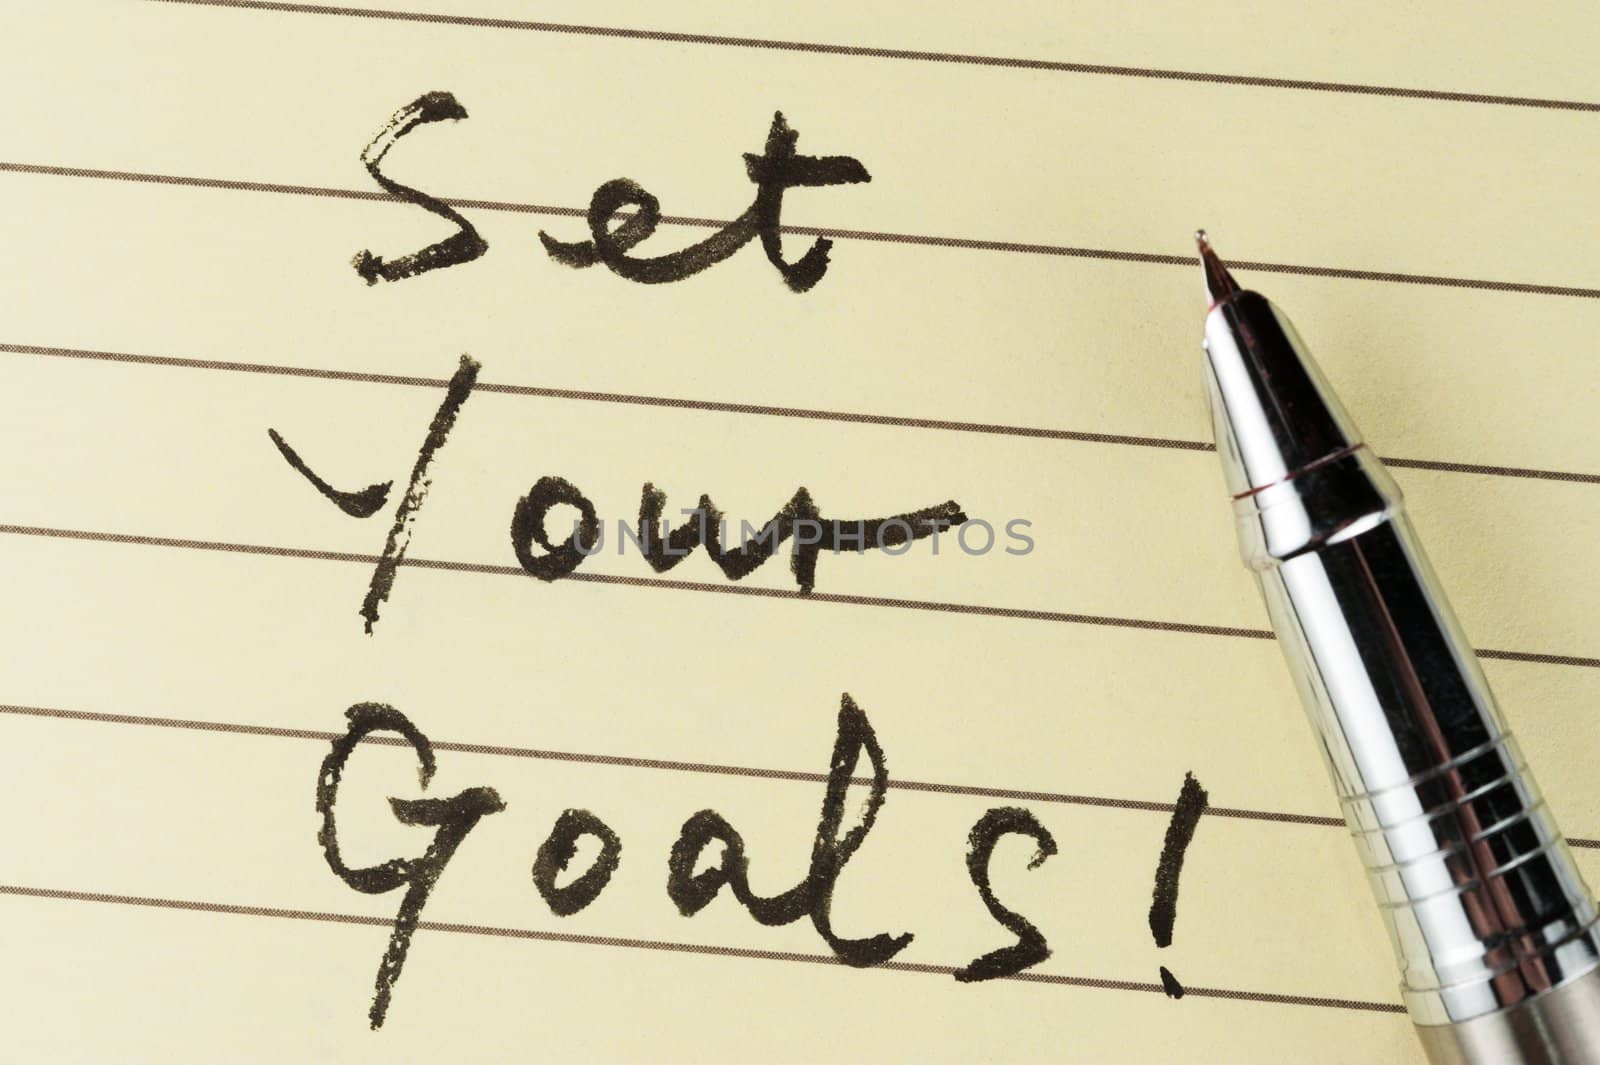 Set your goals words written on lined paper with a pen on it